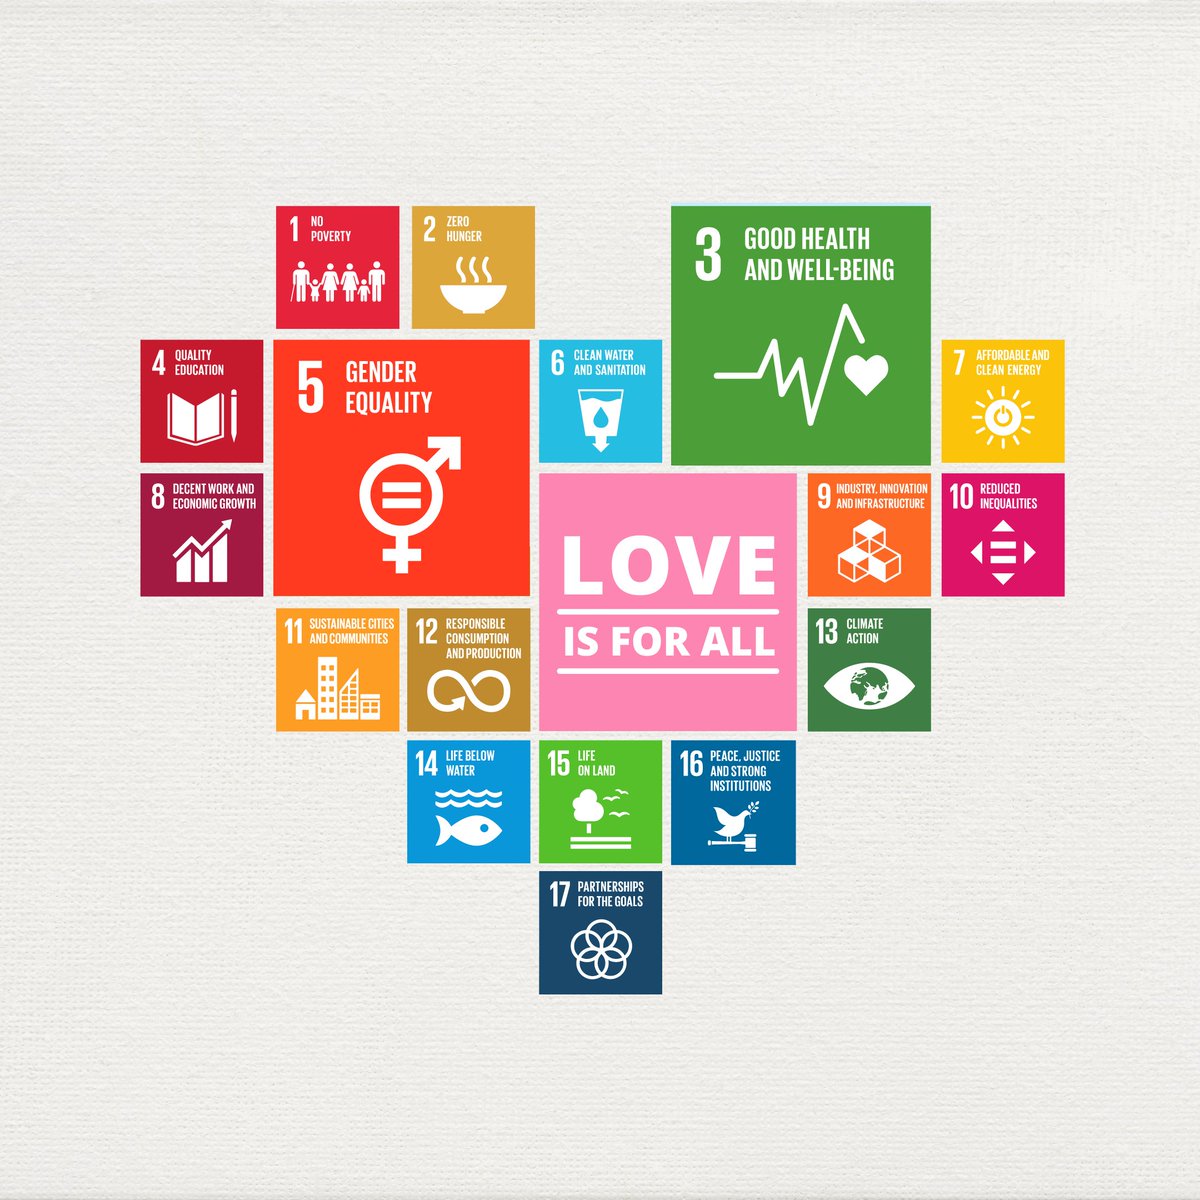 💸 No poverty 🍜 Zero hunger ⚕️ Good health 📒 Quality education 👩🏾‍💻 Decent jobs ⚖️ Gender equality ☀️ Clean energy ☔ Climate action 🕊️ Peace & justice ... And much more This #ValentinesDay and every day, we put the #GlobalGoals at the 💙 of all we do. go.undp.org/SDGs